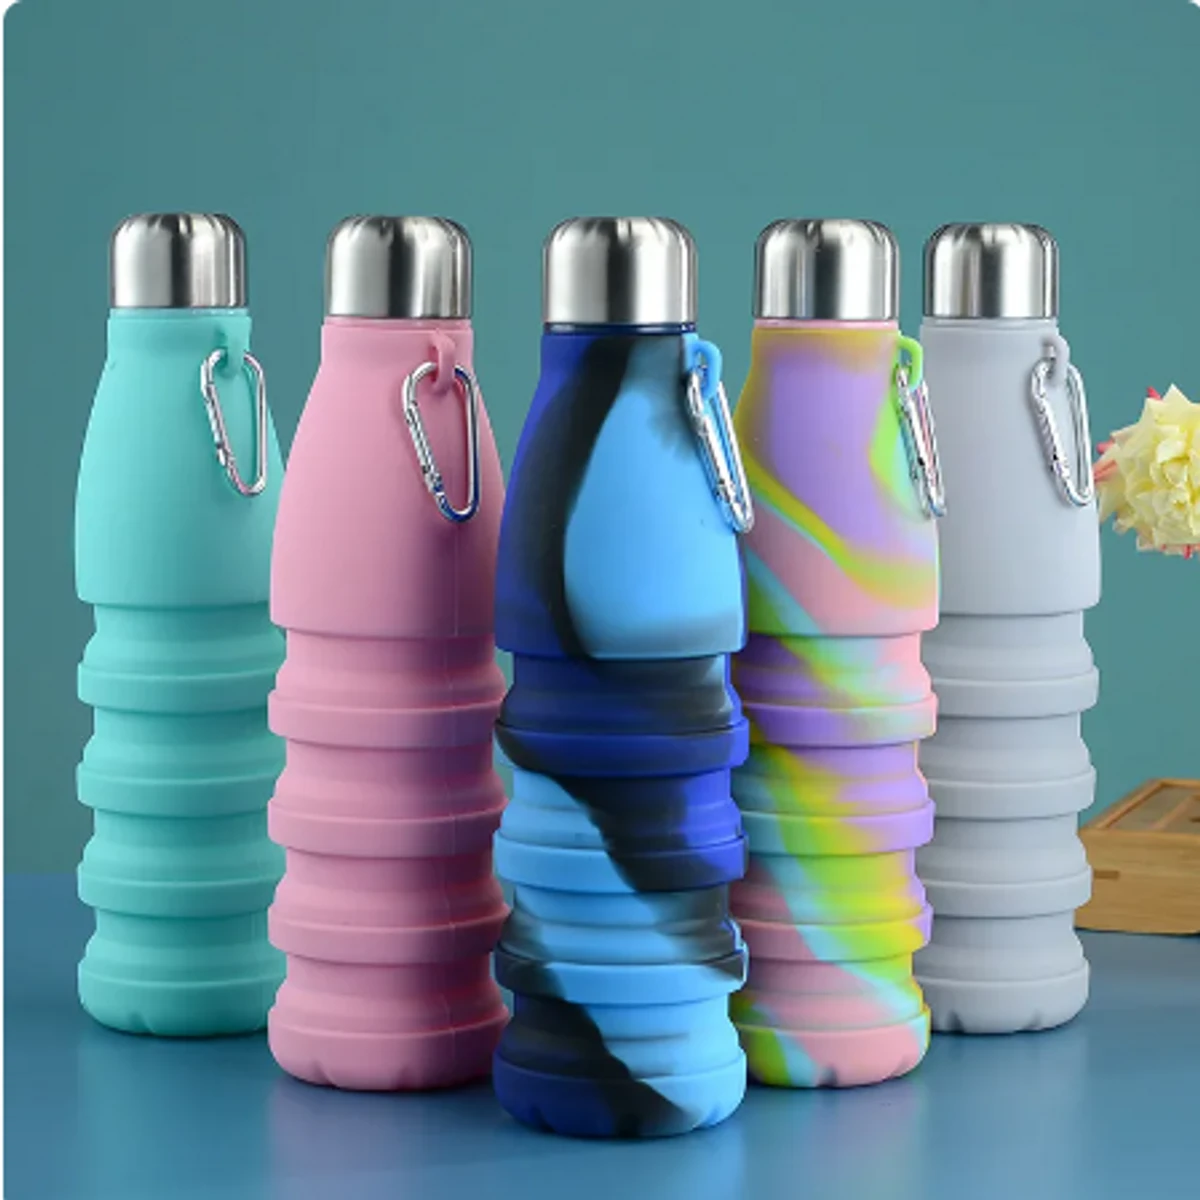 550ML Portable Silicone Bottle Retractable Folding Water Bottle Outdoor Sports Travel Drinking Cup with Carabiner Large Capacity